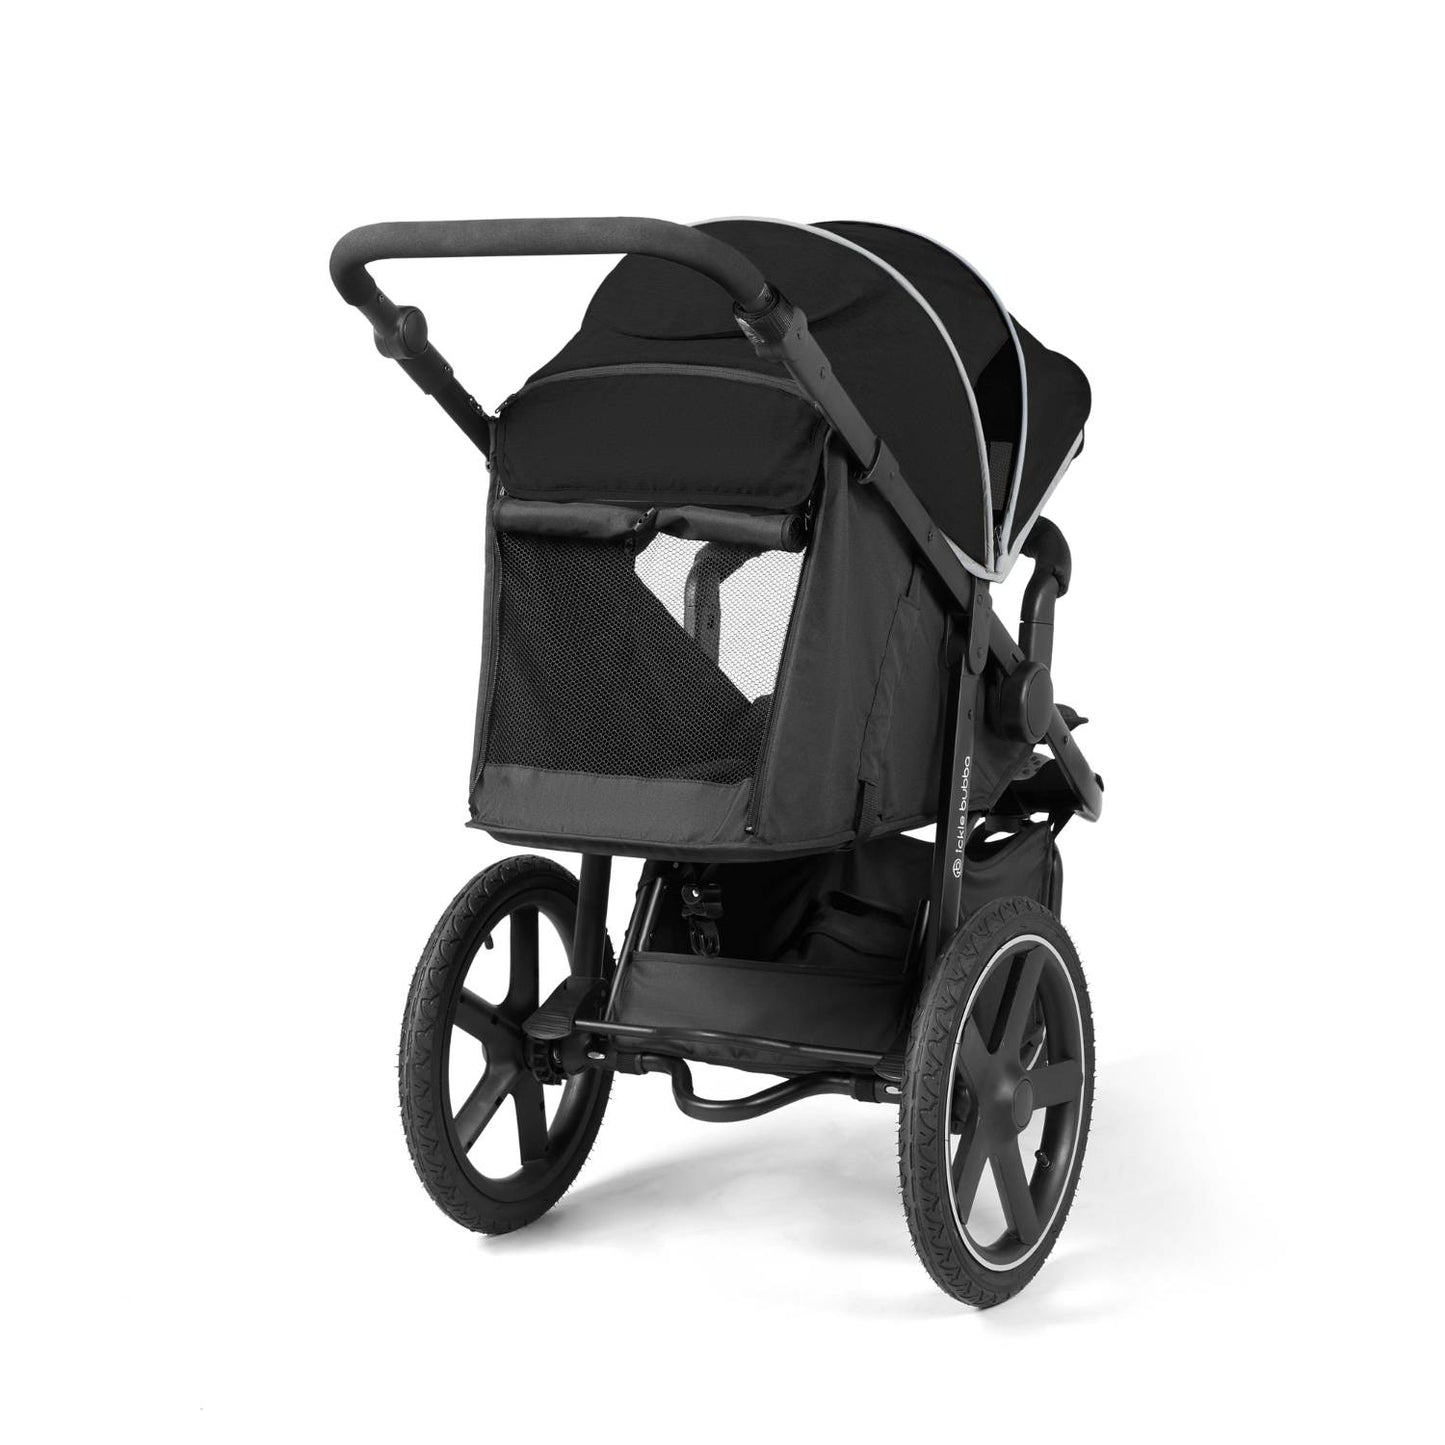 Roll-up ventilated panel at the back of Ickle Bubba Venus Max Jogger Stroller in Black colour